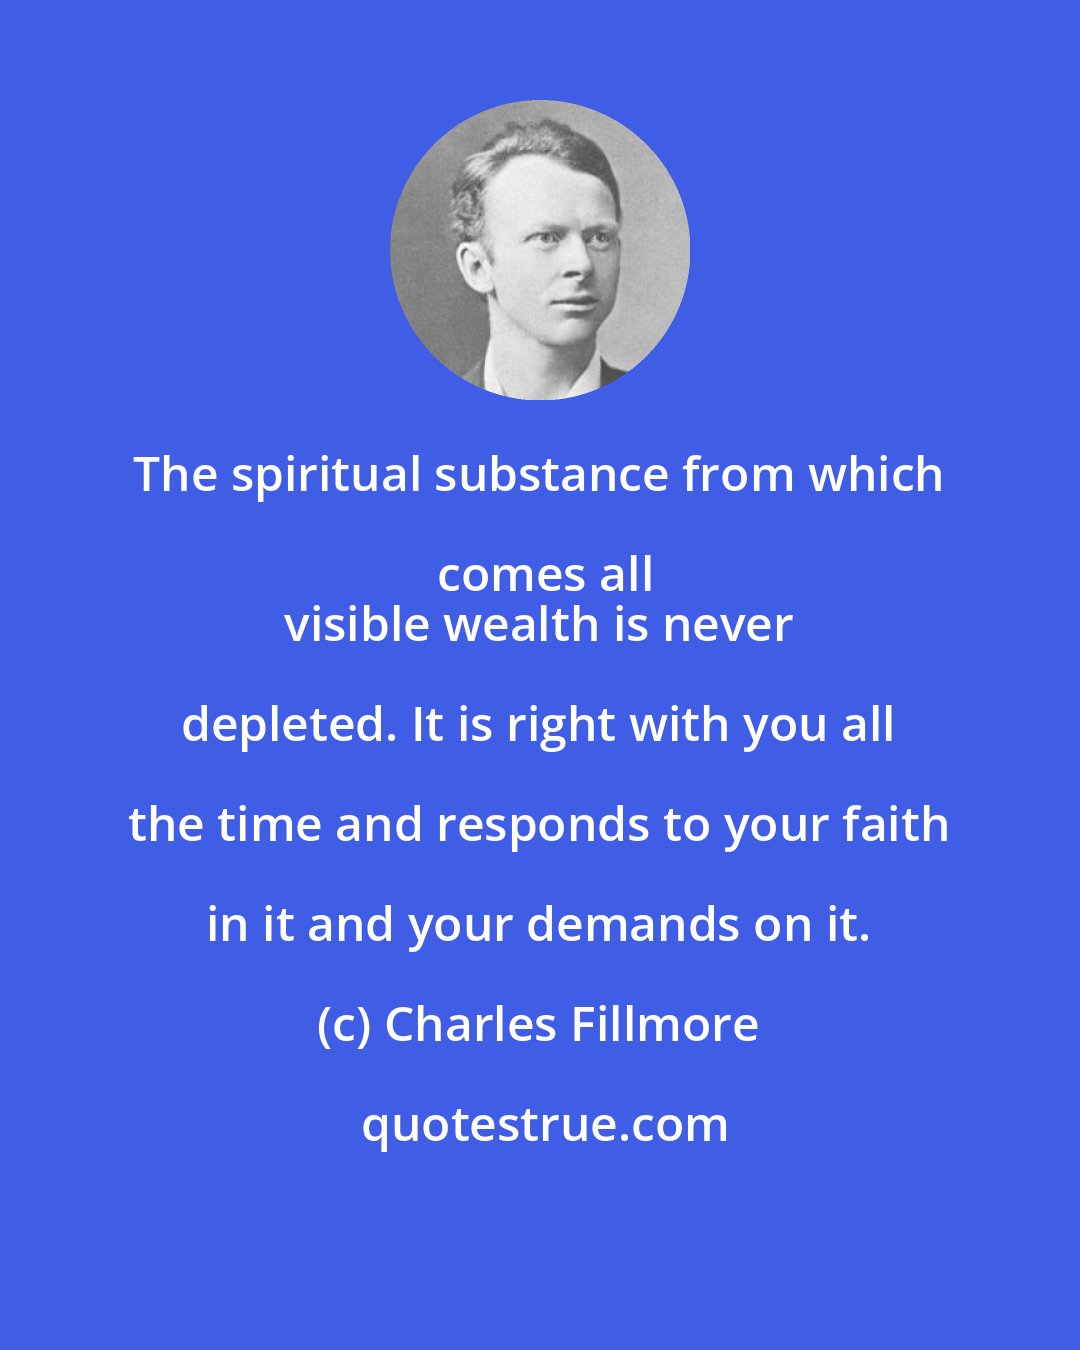 Charles Fillmore: The spiritual substance from which comes all
 visible wealth is never depleted. It is right with you all the time and responds to your faith in it and your demands on it.